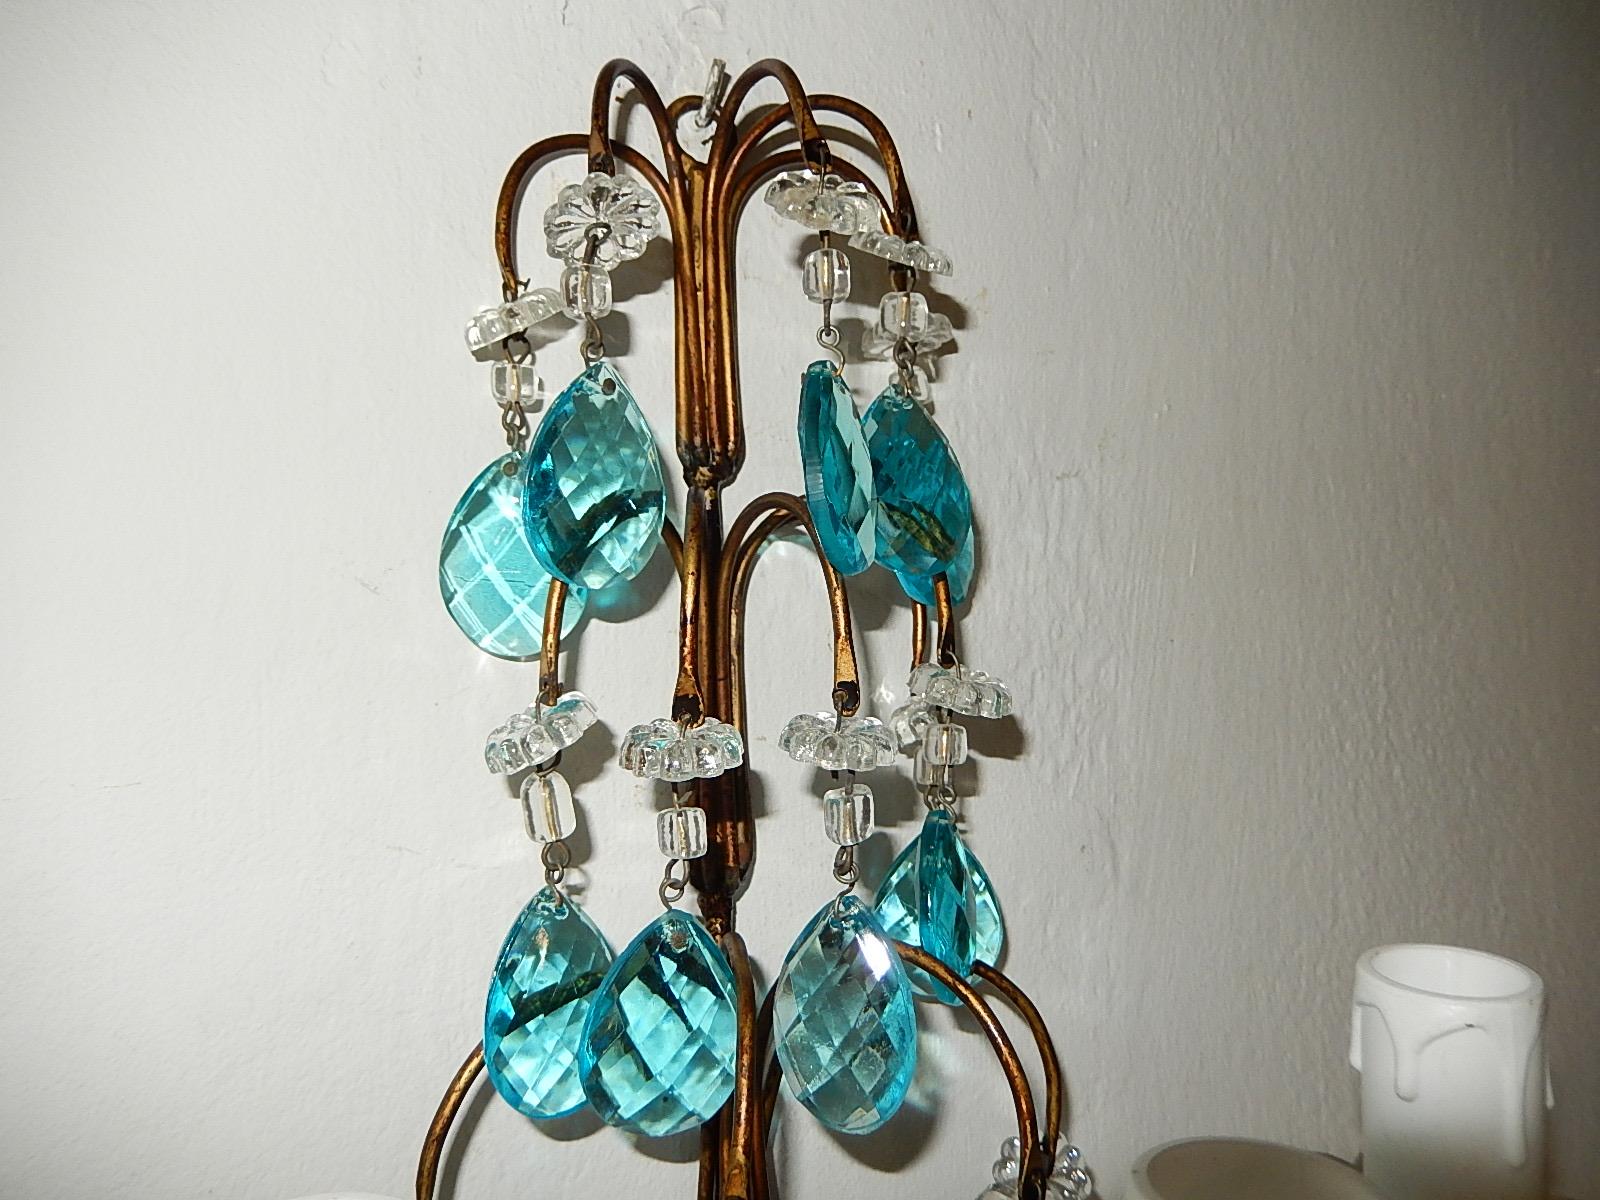 1920 French Aqua Blue Crystal Prisms and Swags Sconces For Sale 2